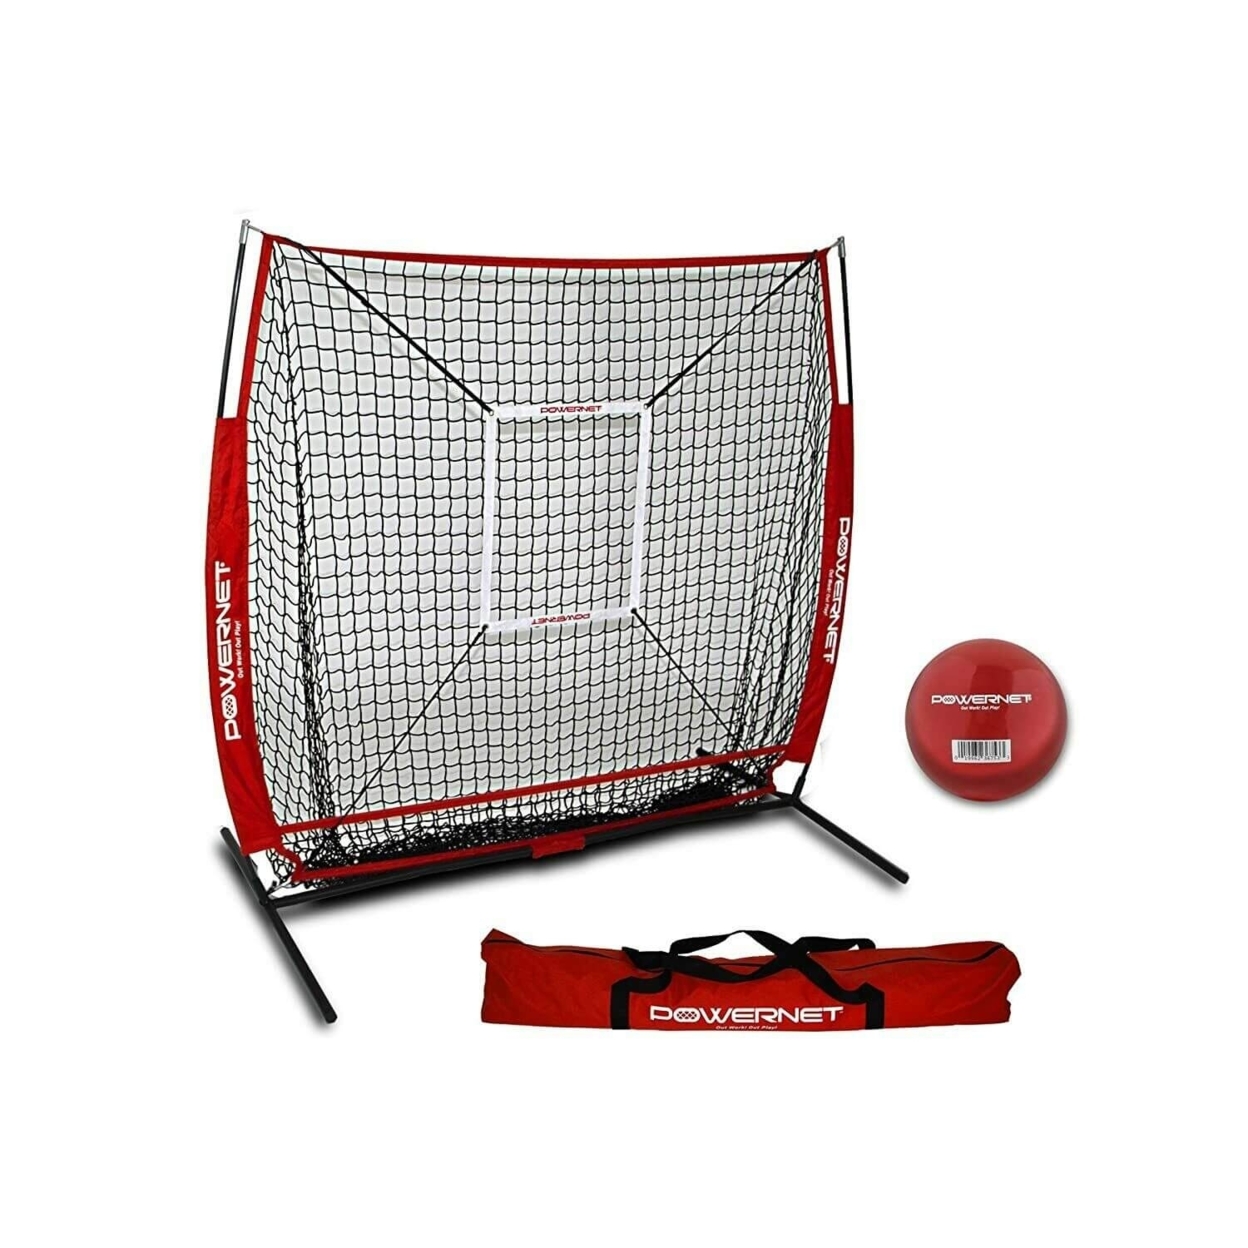 PowerNet 5x5 Practice Hitting Pitching Net + Strike Zone Attachment + Weighted Training Ball Bundle + Carry Bag - Red